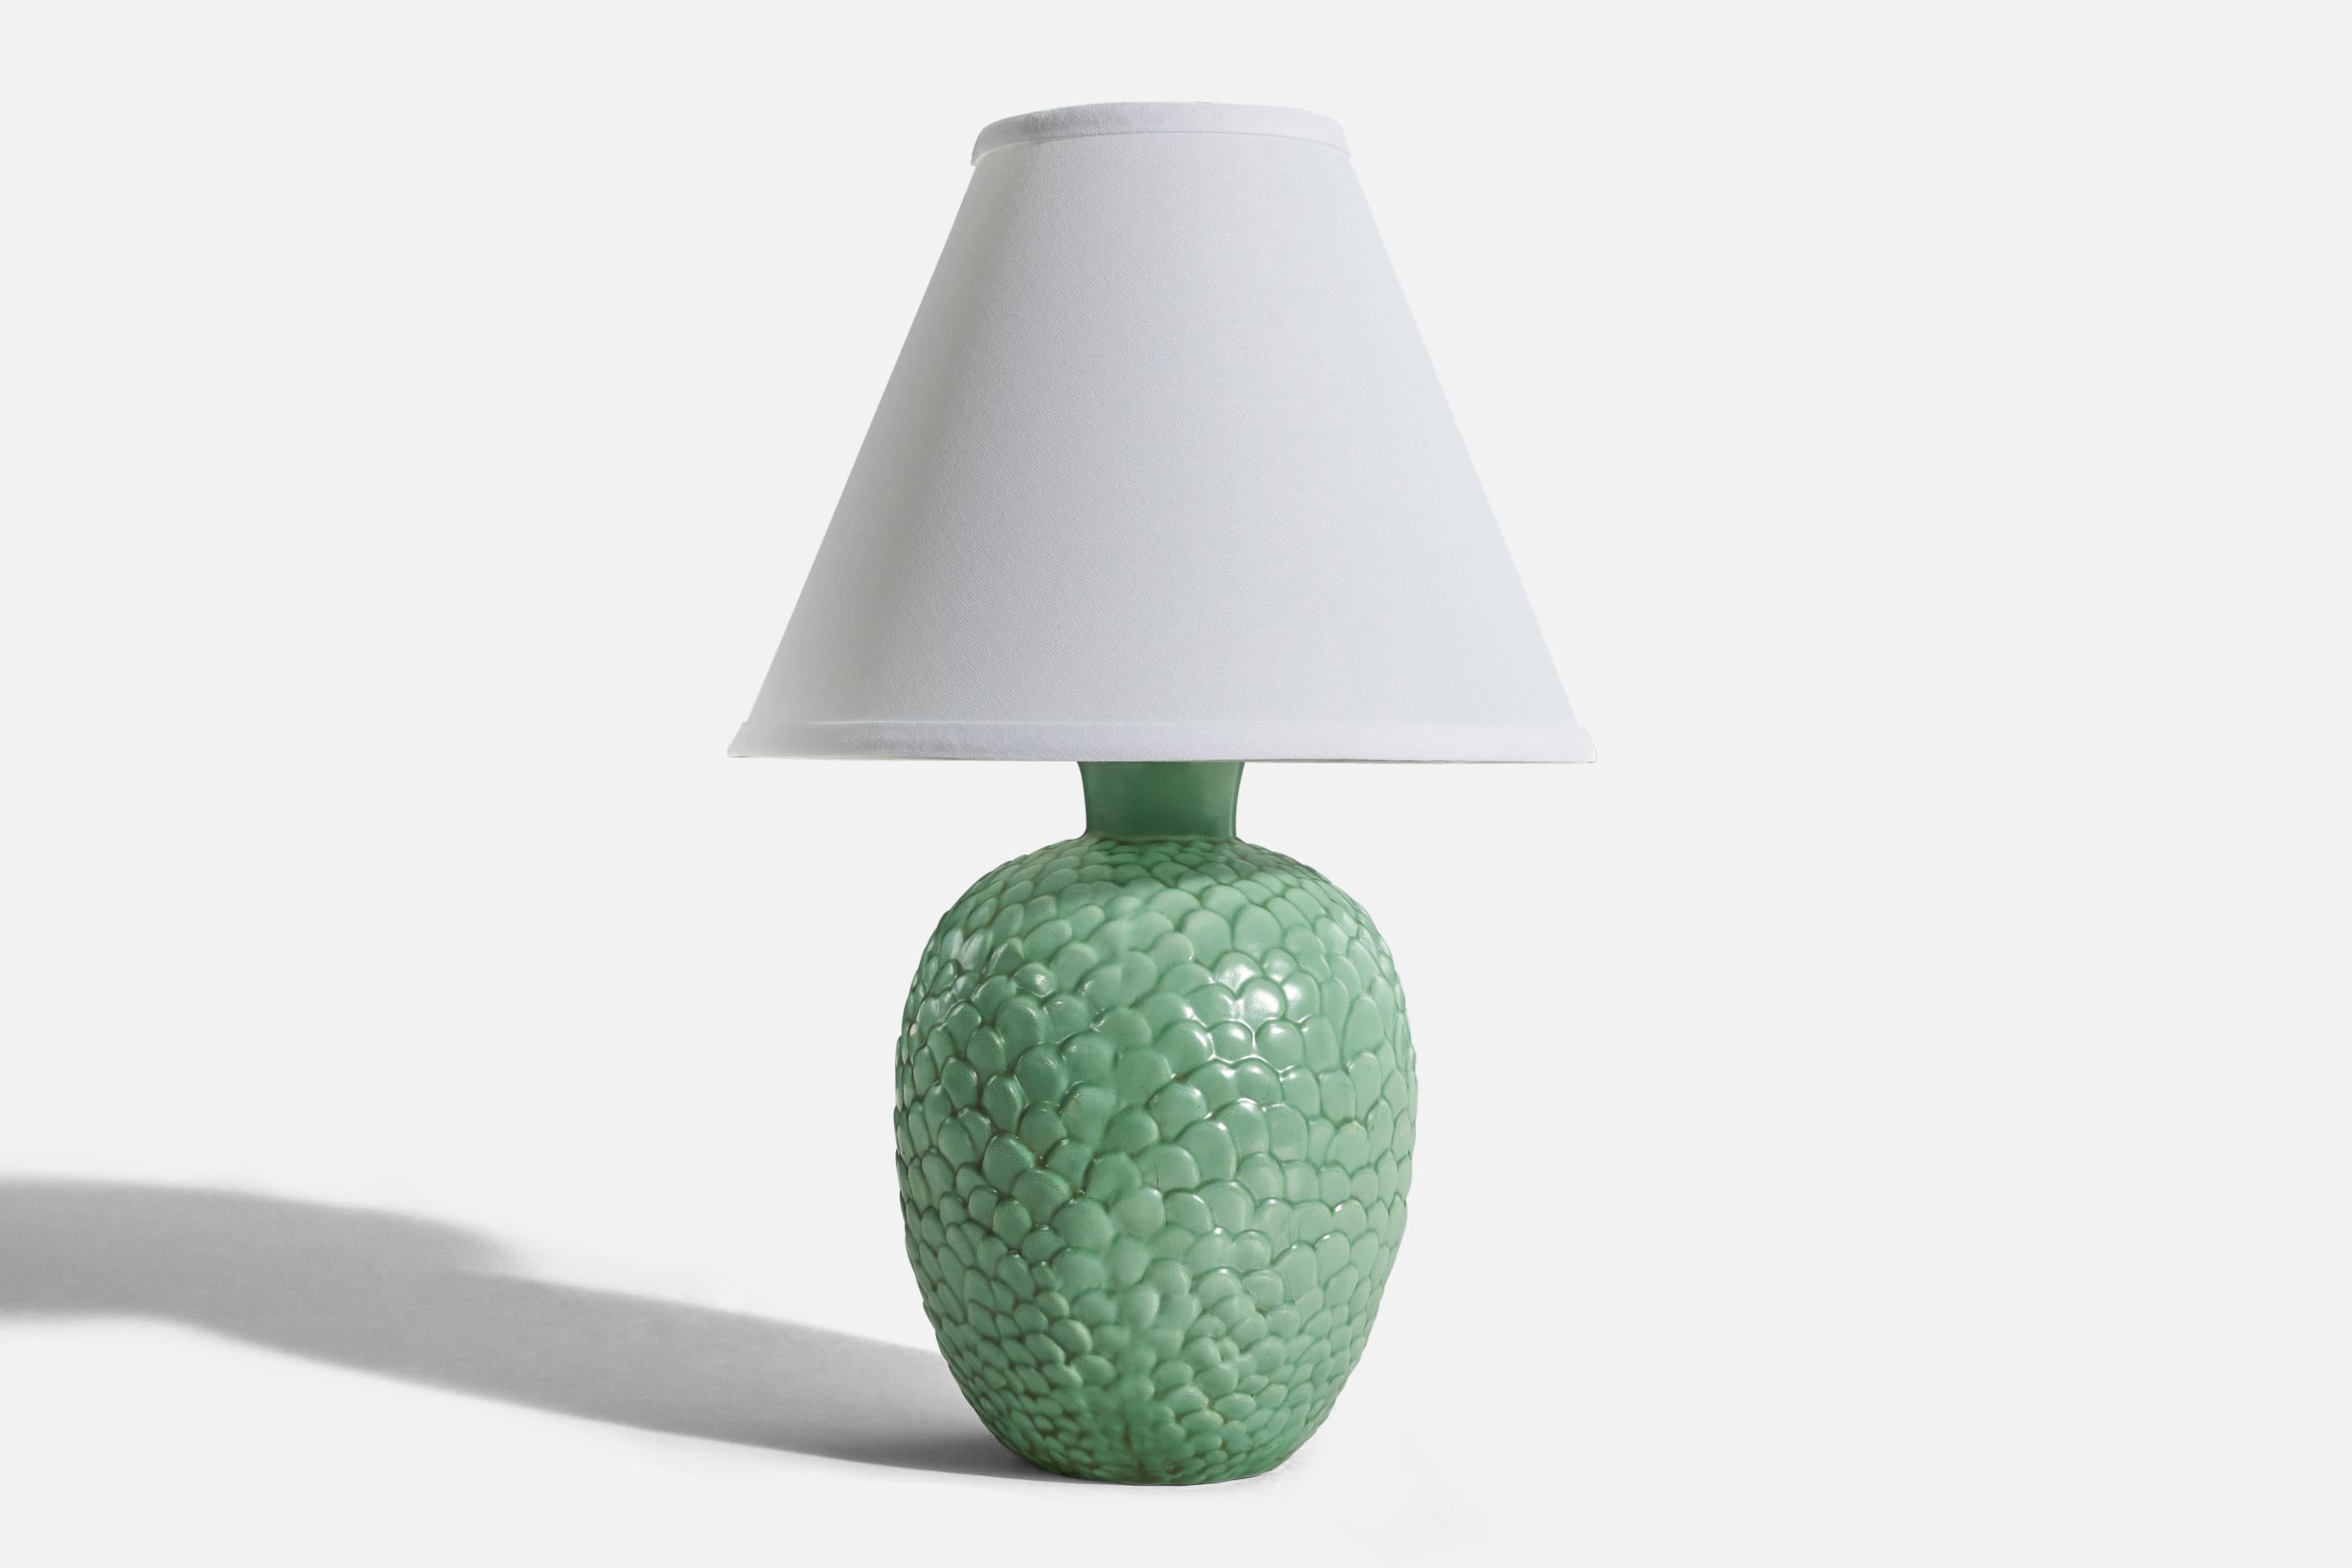 A green, glazed ceramic table lamp designed by Anna-Lisa Thomson and produced by Gefle, Sweden, 1930s. 

Sold without lampshade. 
Dimensions of Lamp (inches) : 11.62 x 6.5 x 6.5 (H x W x D)
Dimensions of Shade (inches) : 4.25 x 10.25 x 8(T x B x